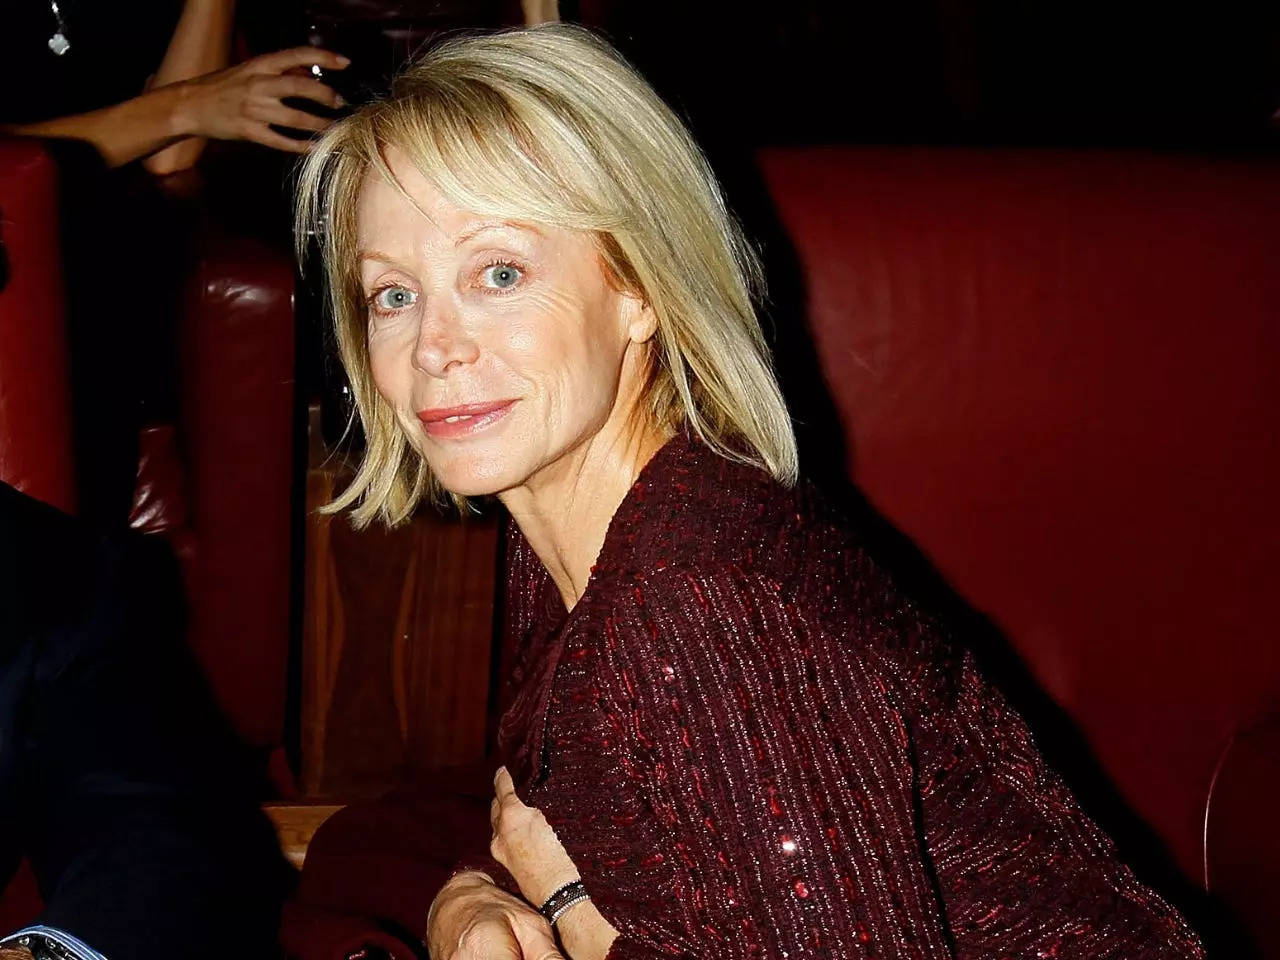 Le Bal founder Ophélie Renouard at the premiere of "Ultrasuede: In Search of Halston," in London.